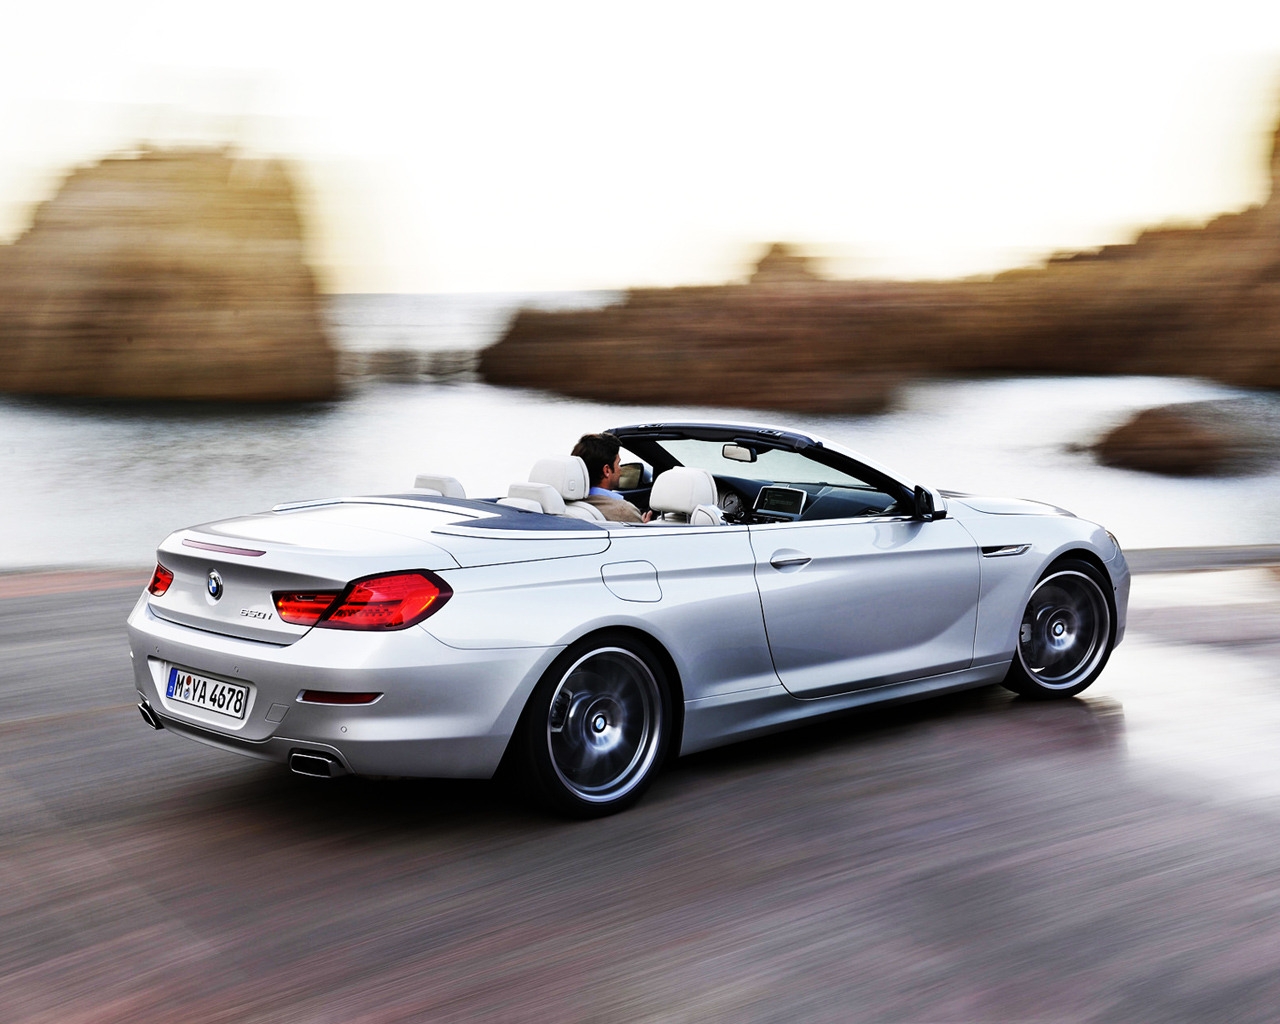 2011 BMW 6 Series Convertible for 1280 x 1024 resolution